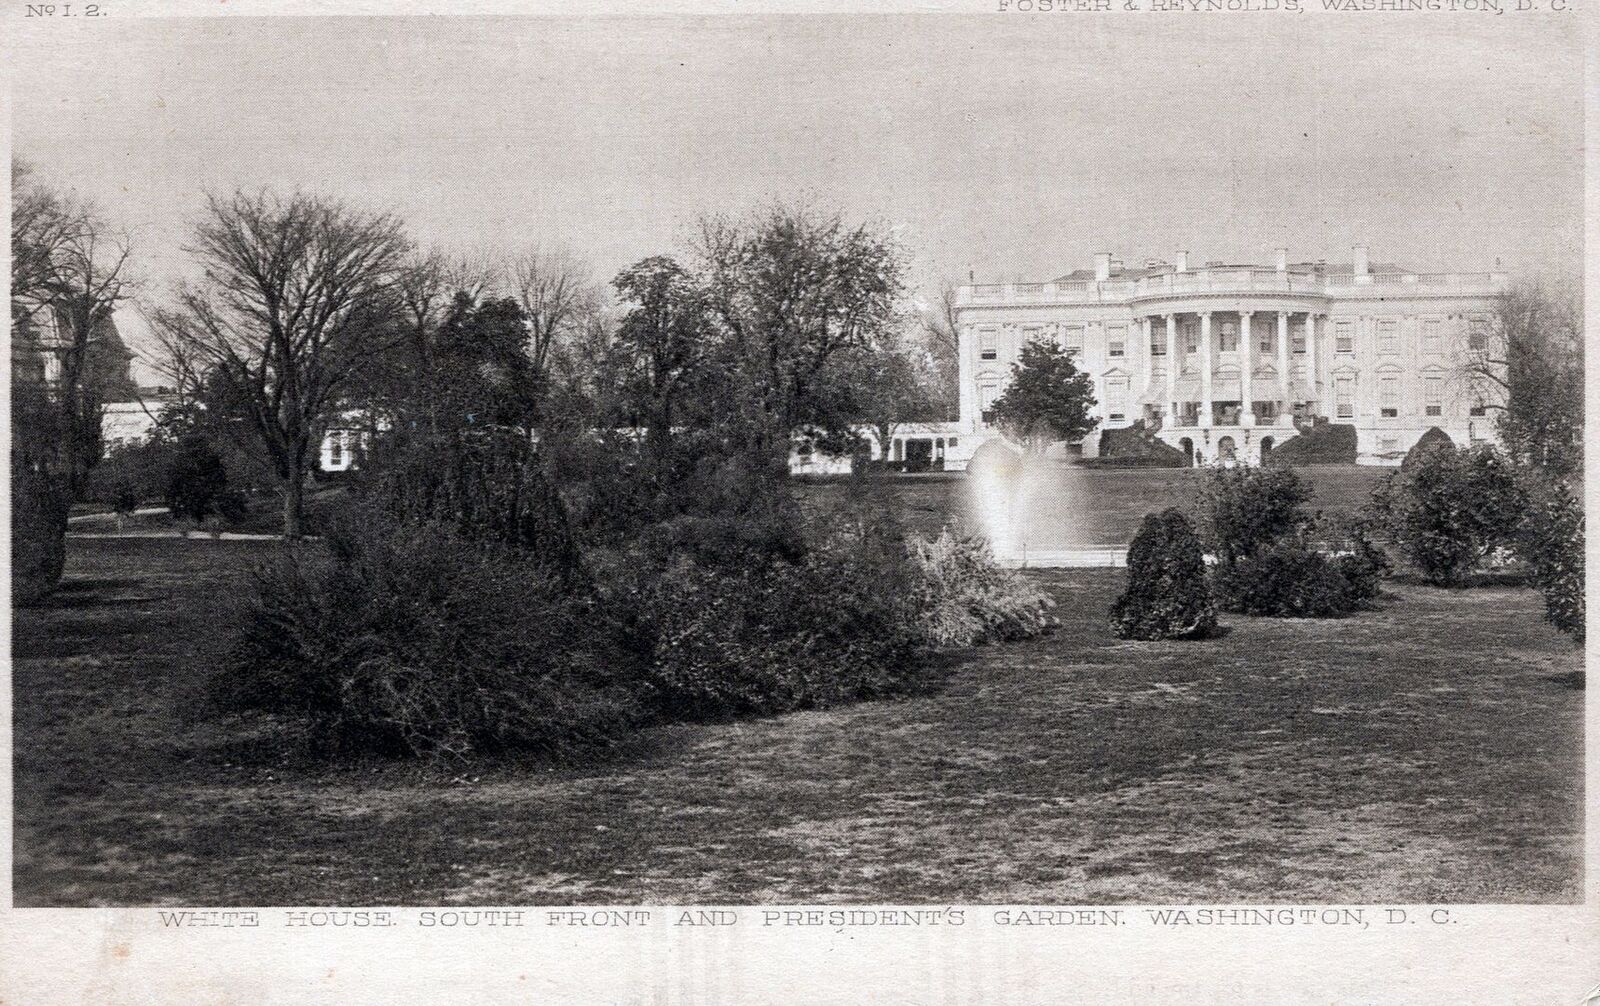 WASHINGTON DC - White House South Front And President's Garden Postcard - udb